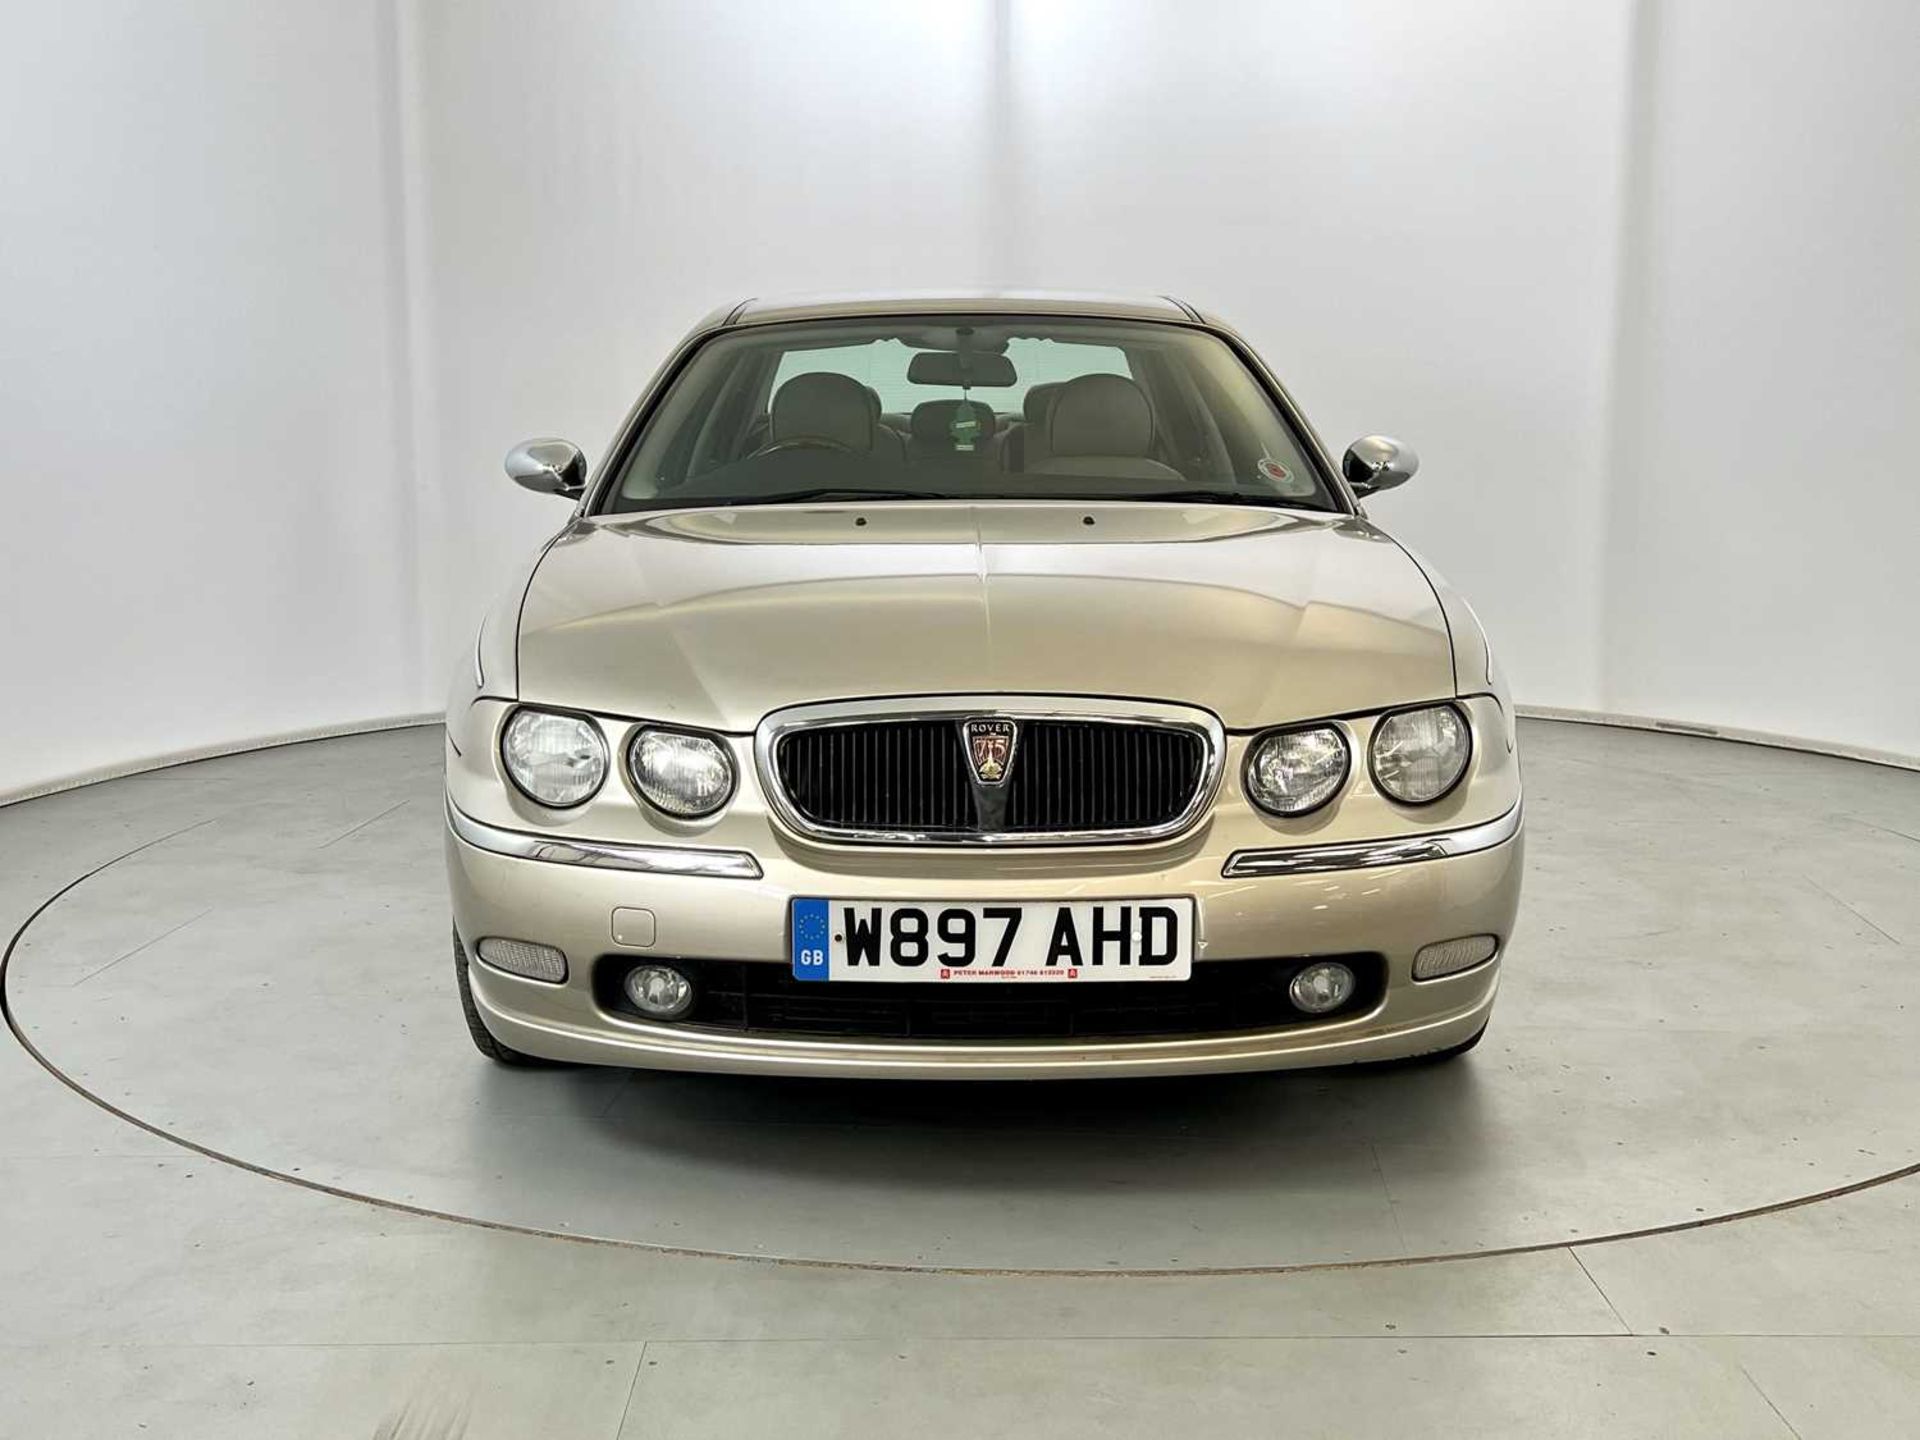 2000 Rover 75 Connoisseur - Image 2 of 34